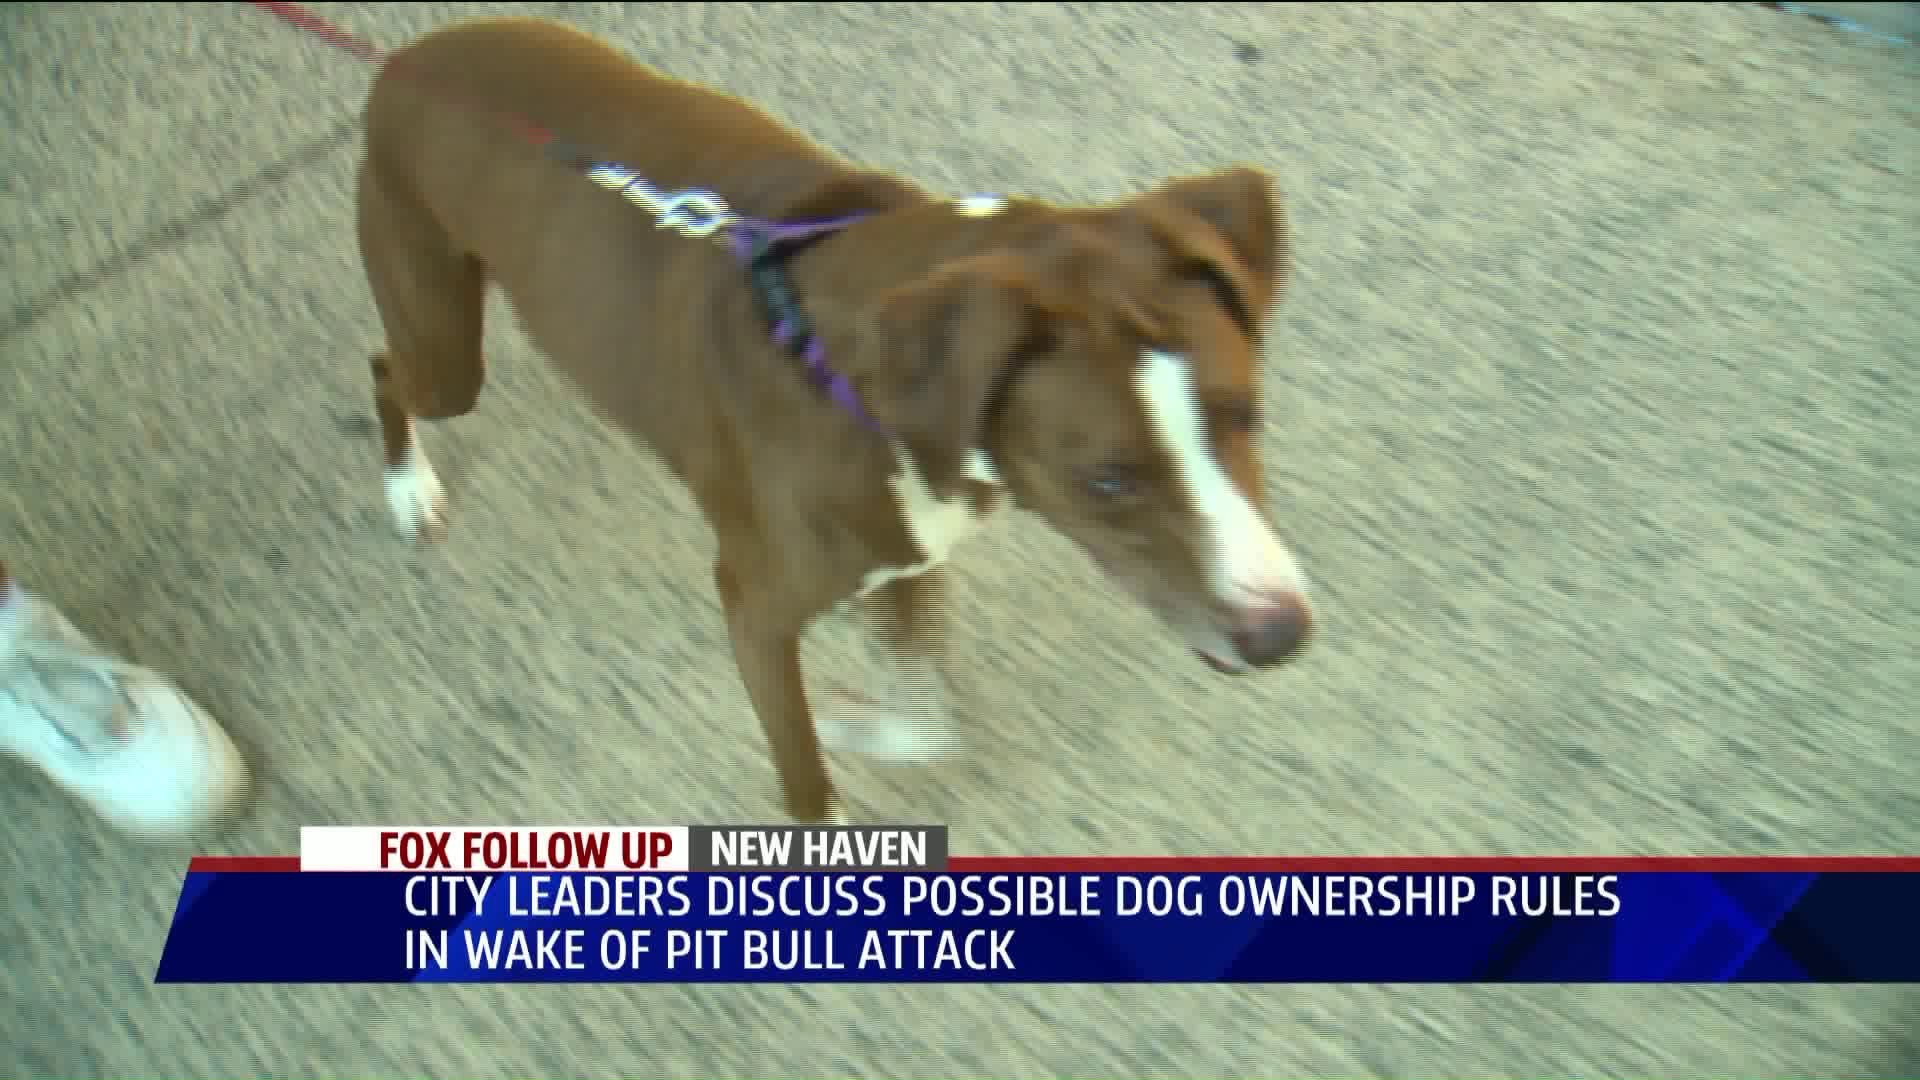 Leaders discuss dog ownership rules following recent attack